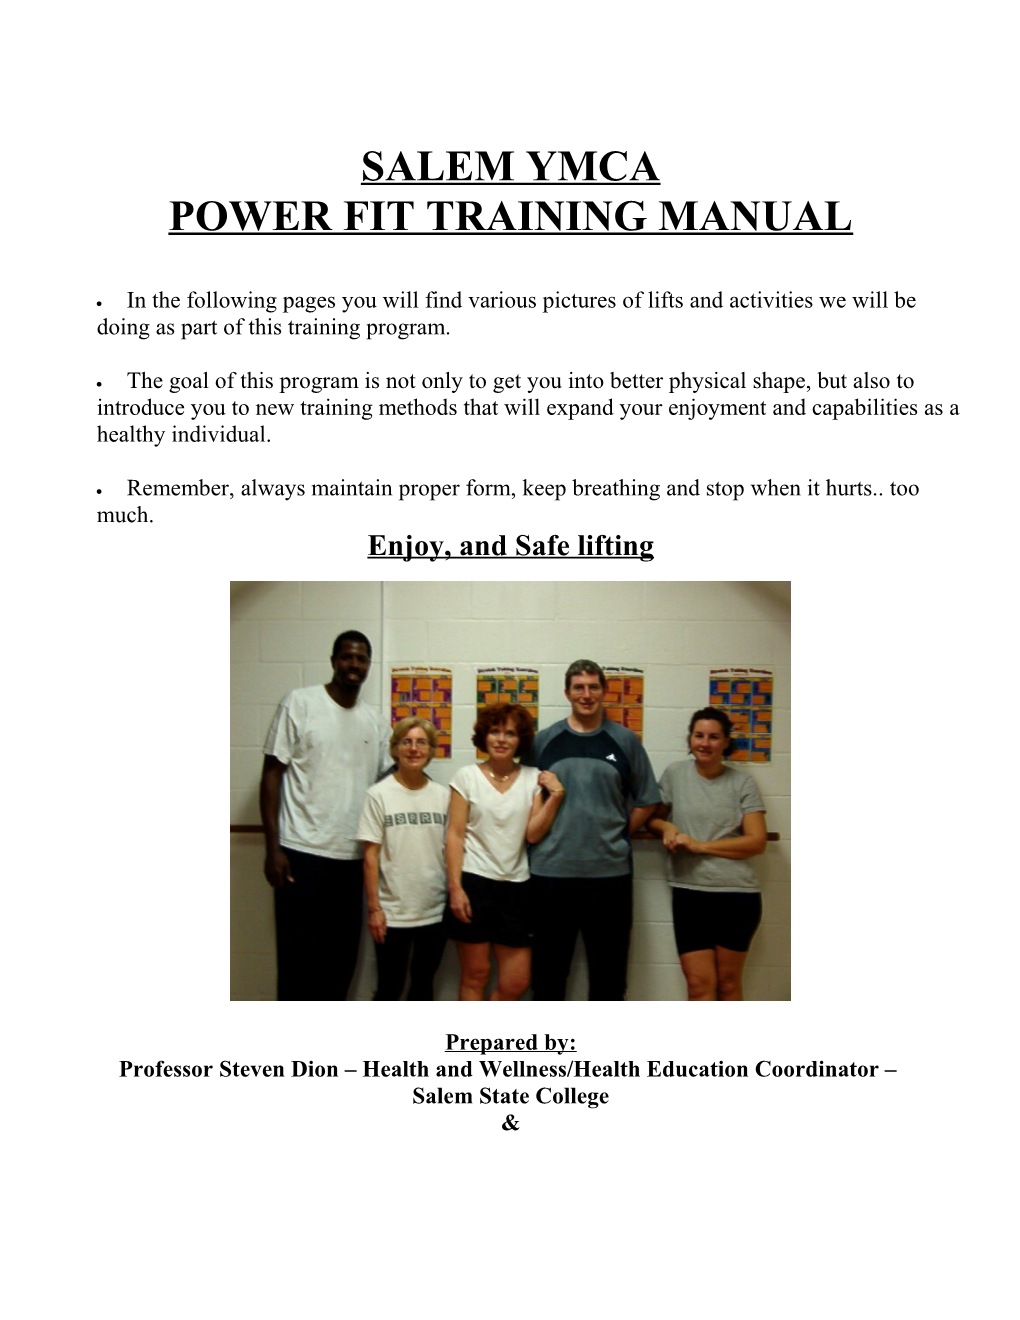 Power Fit Training Manual